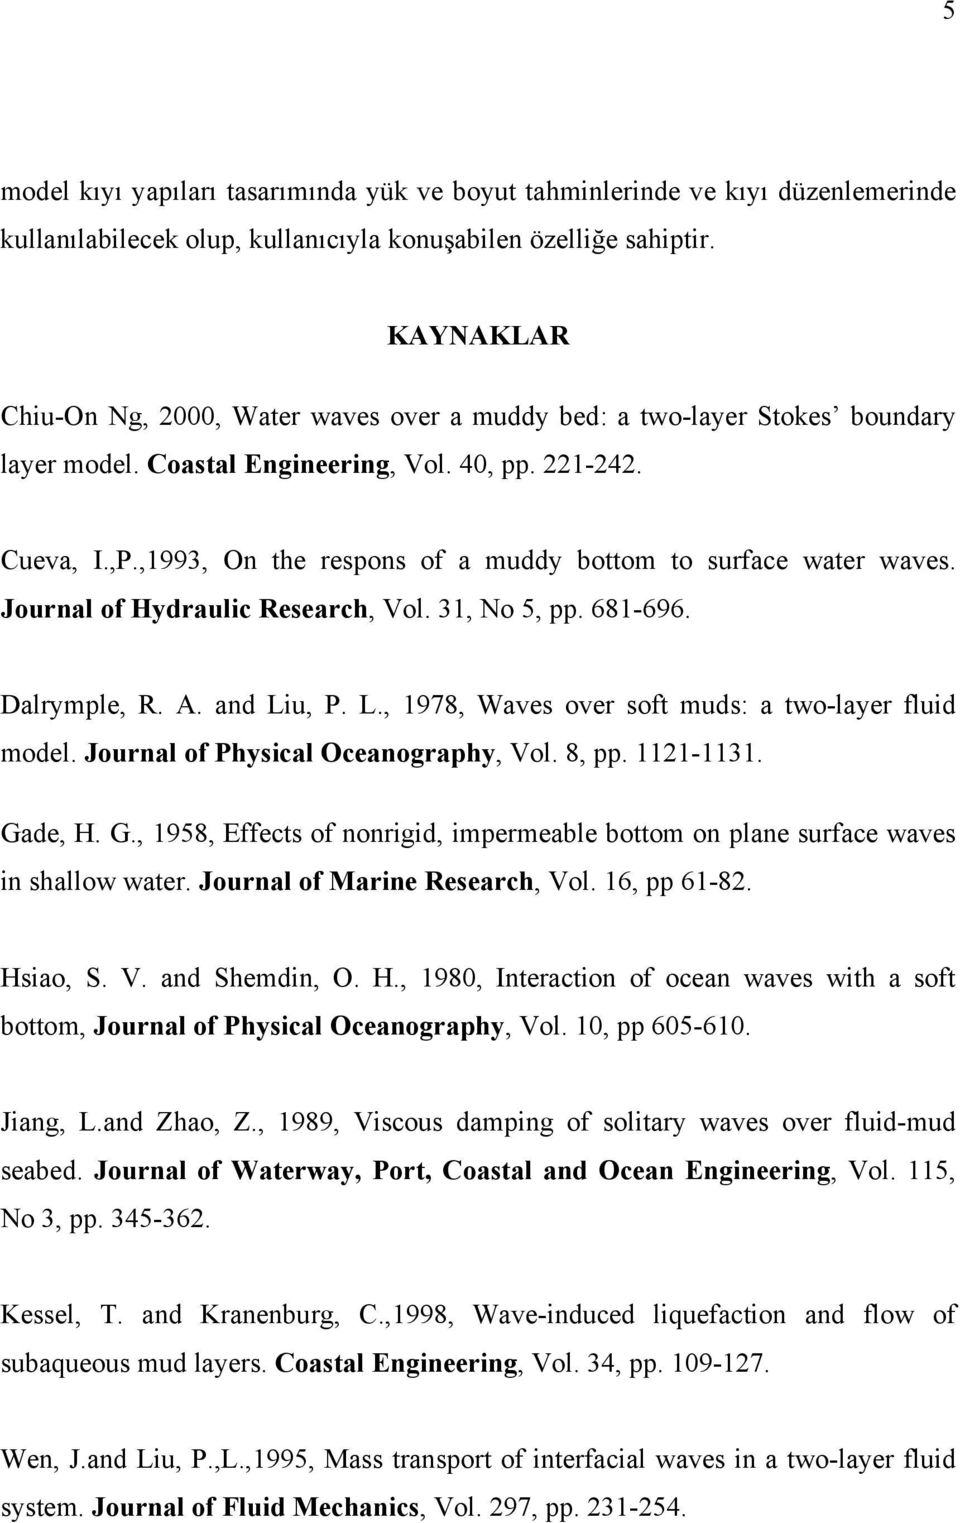 Jornal of Hydralc Research, Vol. 3, No 5, pp. 68-696. Dalrymple, R. A. and L, P. L., 978, Waves over sof mds: a o-layer fld model. Jornal of Physcal Oceanography, Vol. 8, pp. -3. Ga